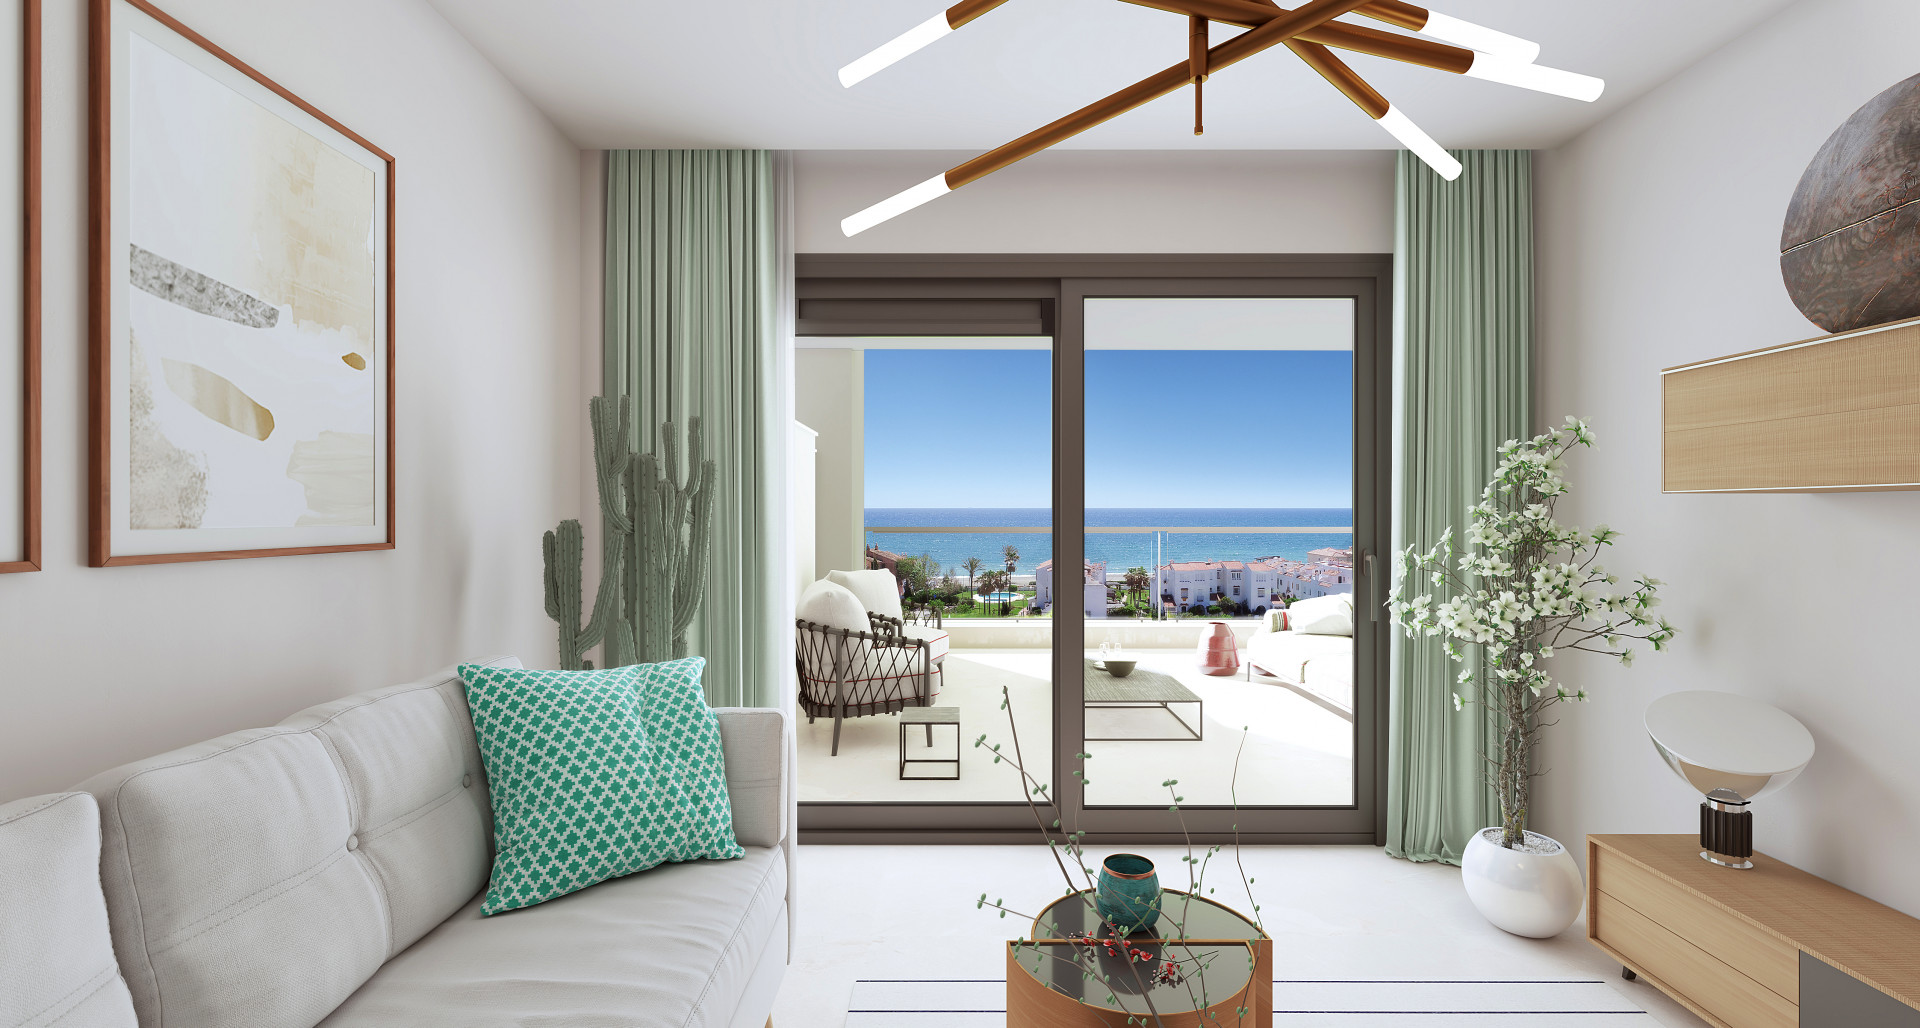 Ground floor flat with contemporary design garden and two bedrooms with sea views in Casares Playa. | Image 8